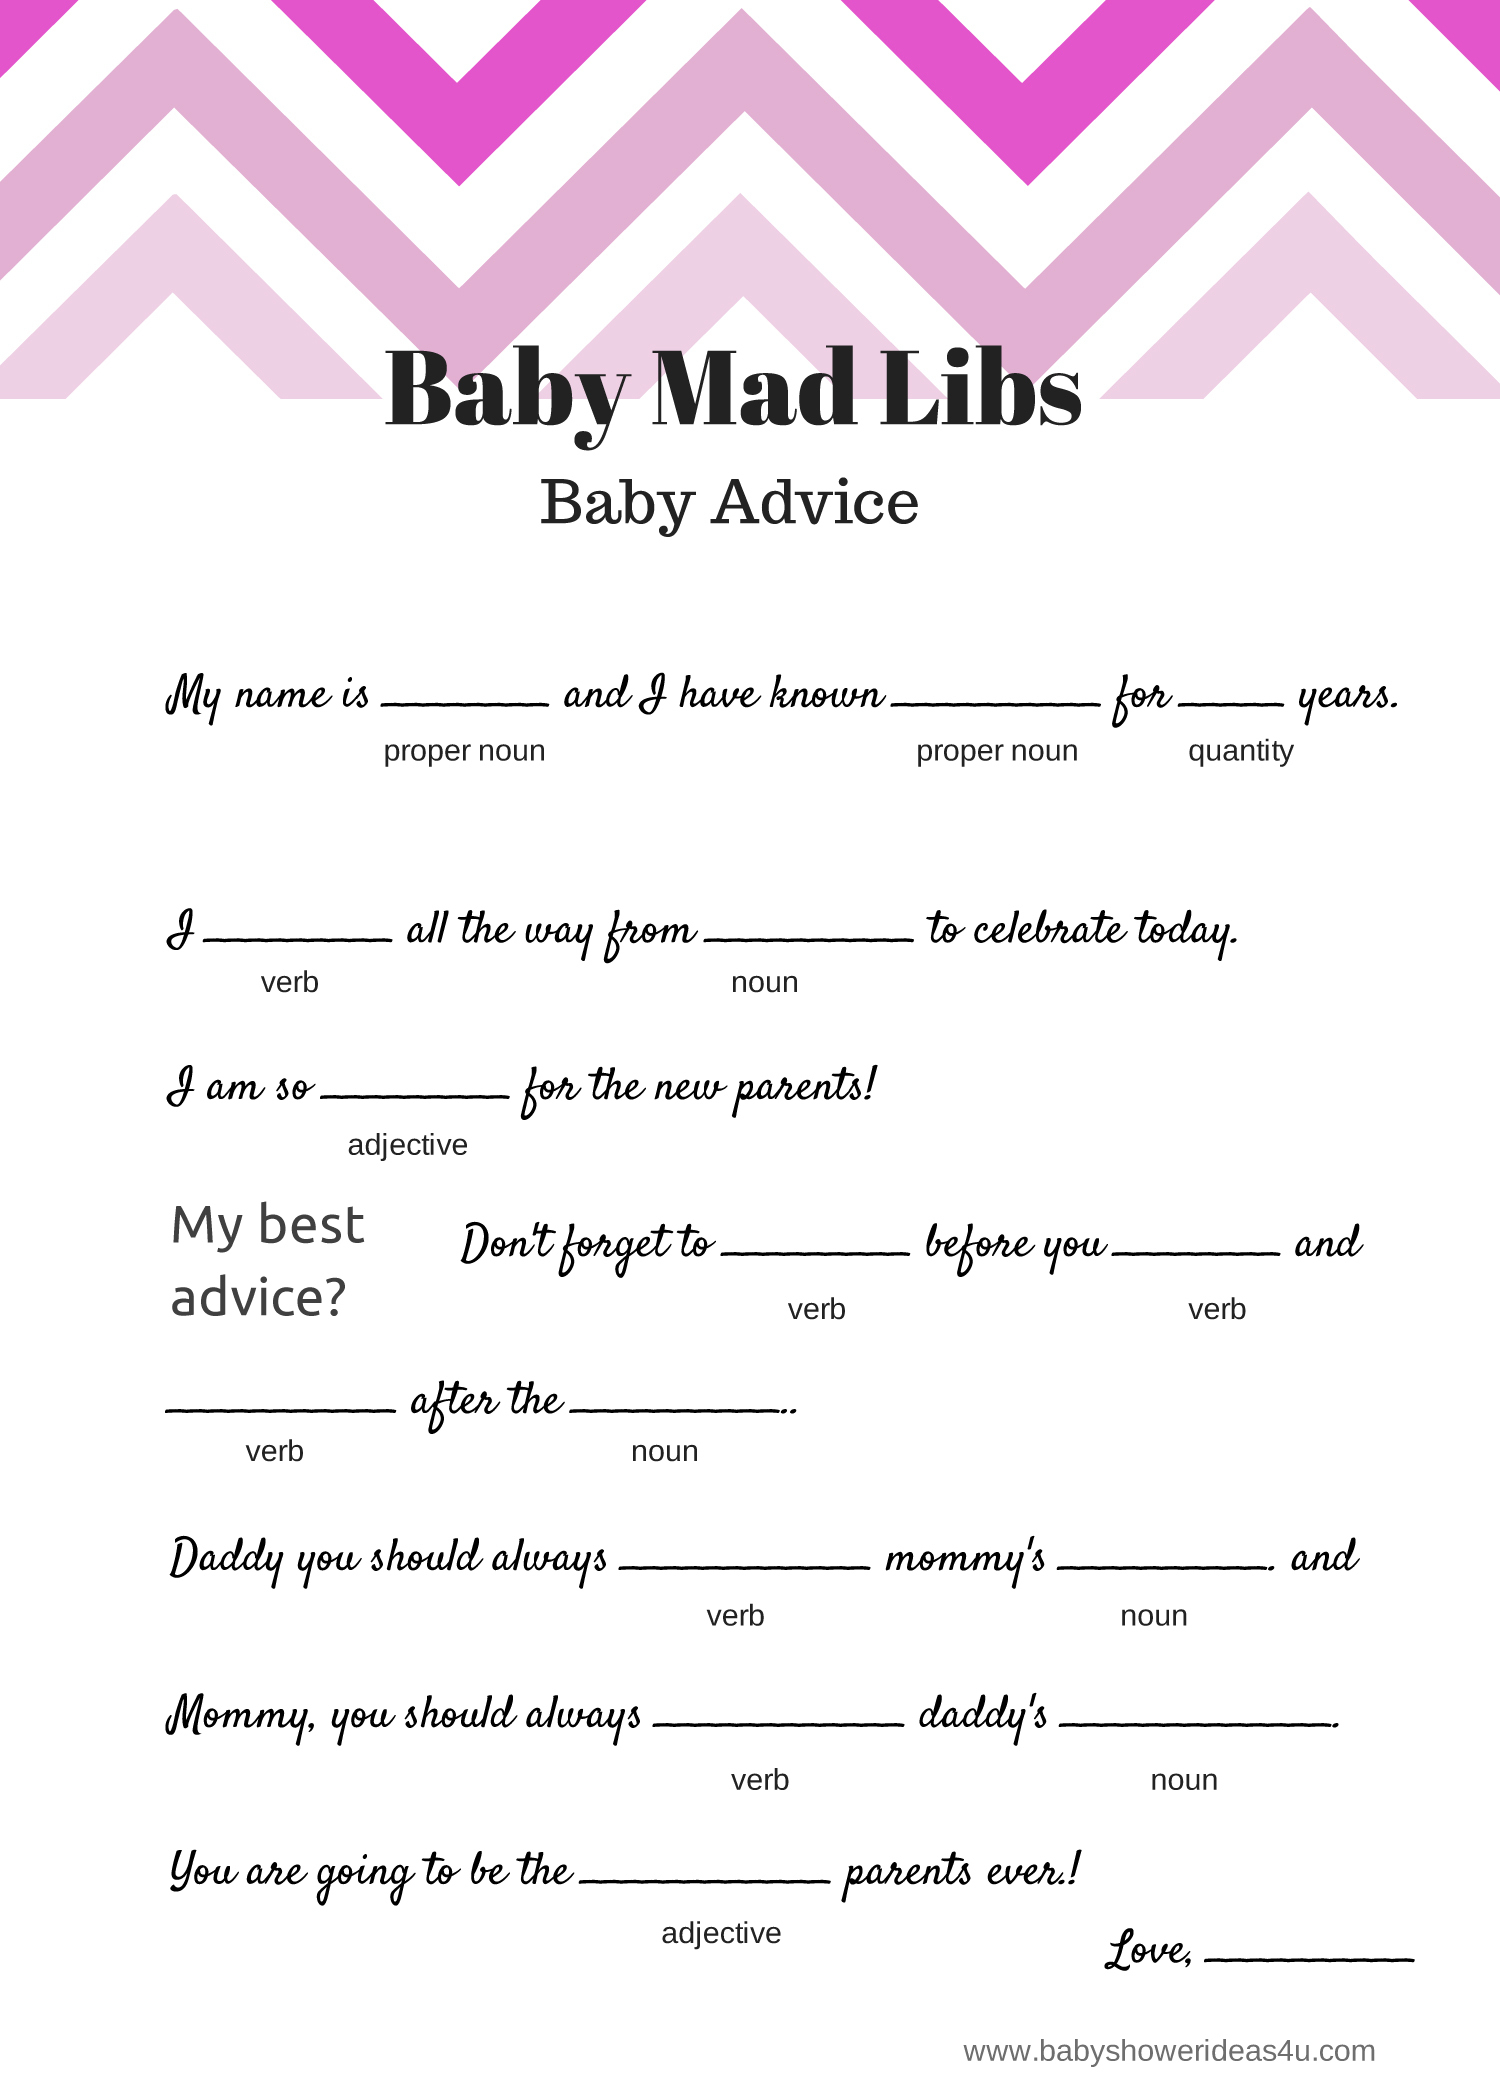 Free Baby Mad Libs Game - Baby Advice - Baby Shower Ideas - Themes - Baby Shower Mad Libs Printable Free